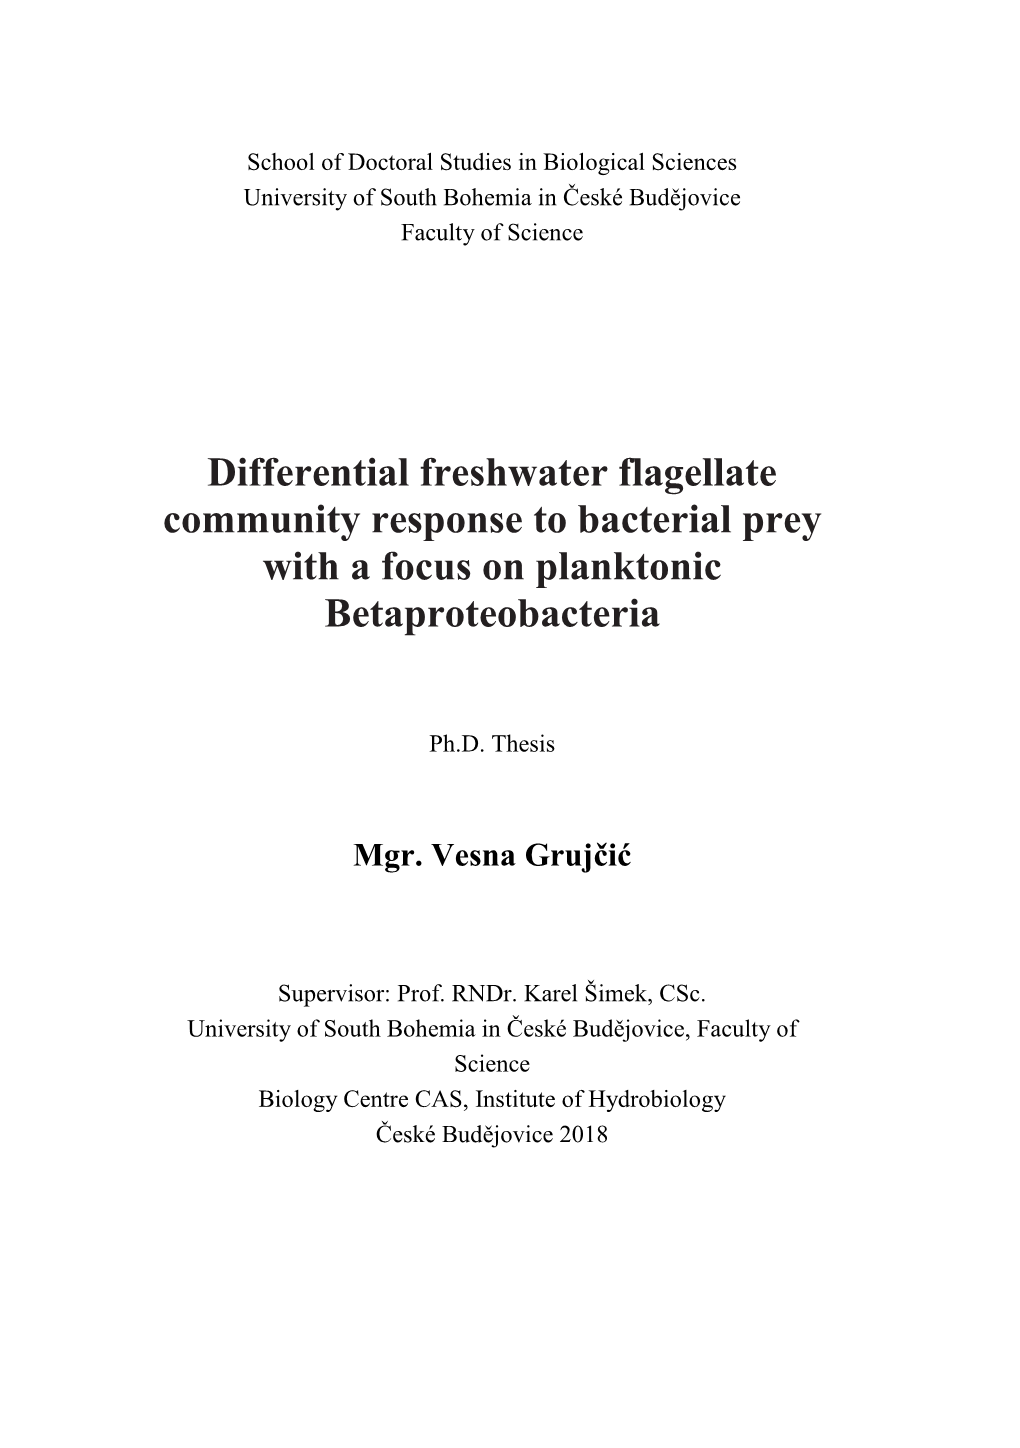 Differential Freshwater Flagellate Community Response to Bacterial Prey with a Focus on Planktonic Betaproteobacteria